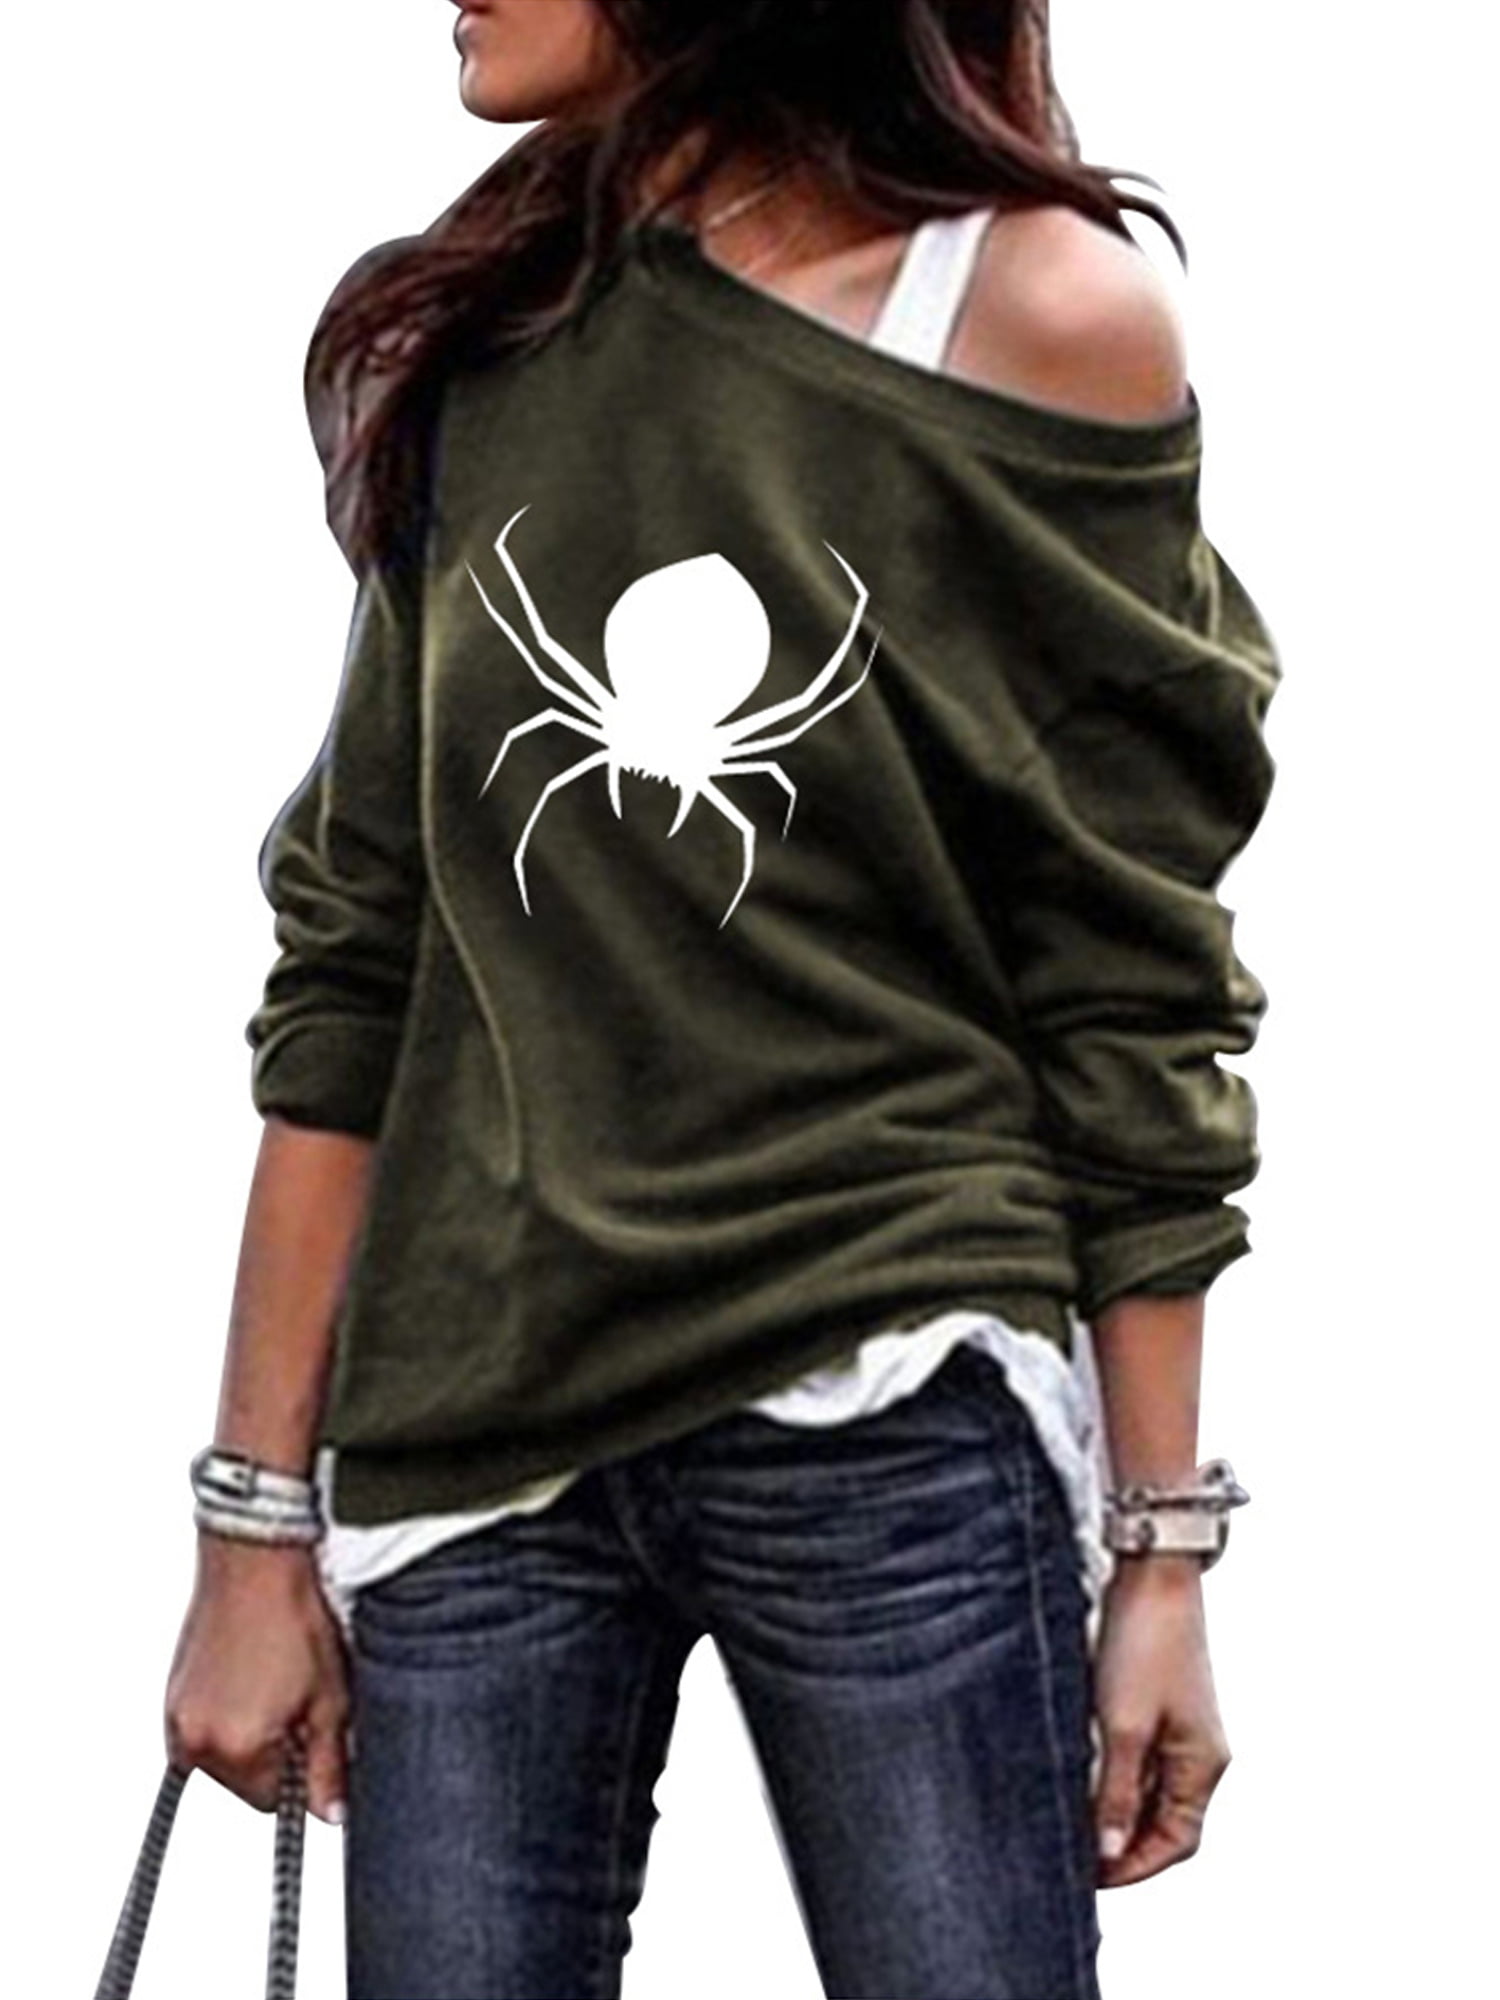 Women Happy Halloween T-Shirt Cute Spider Web Graphic Tee Top Fall Casual Loose Short Sleeve Tops